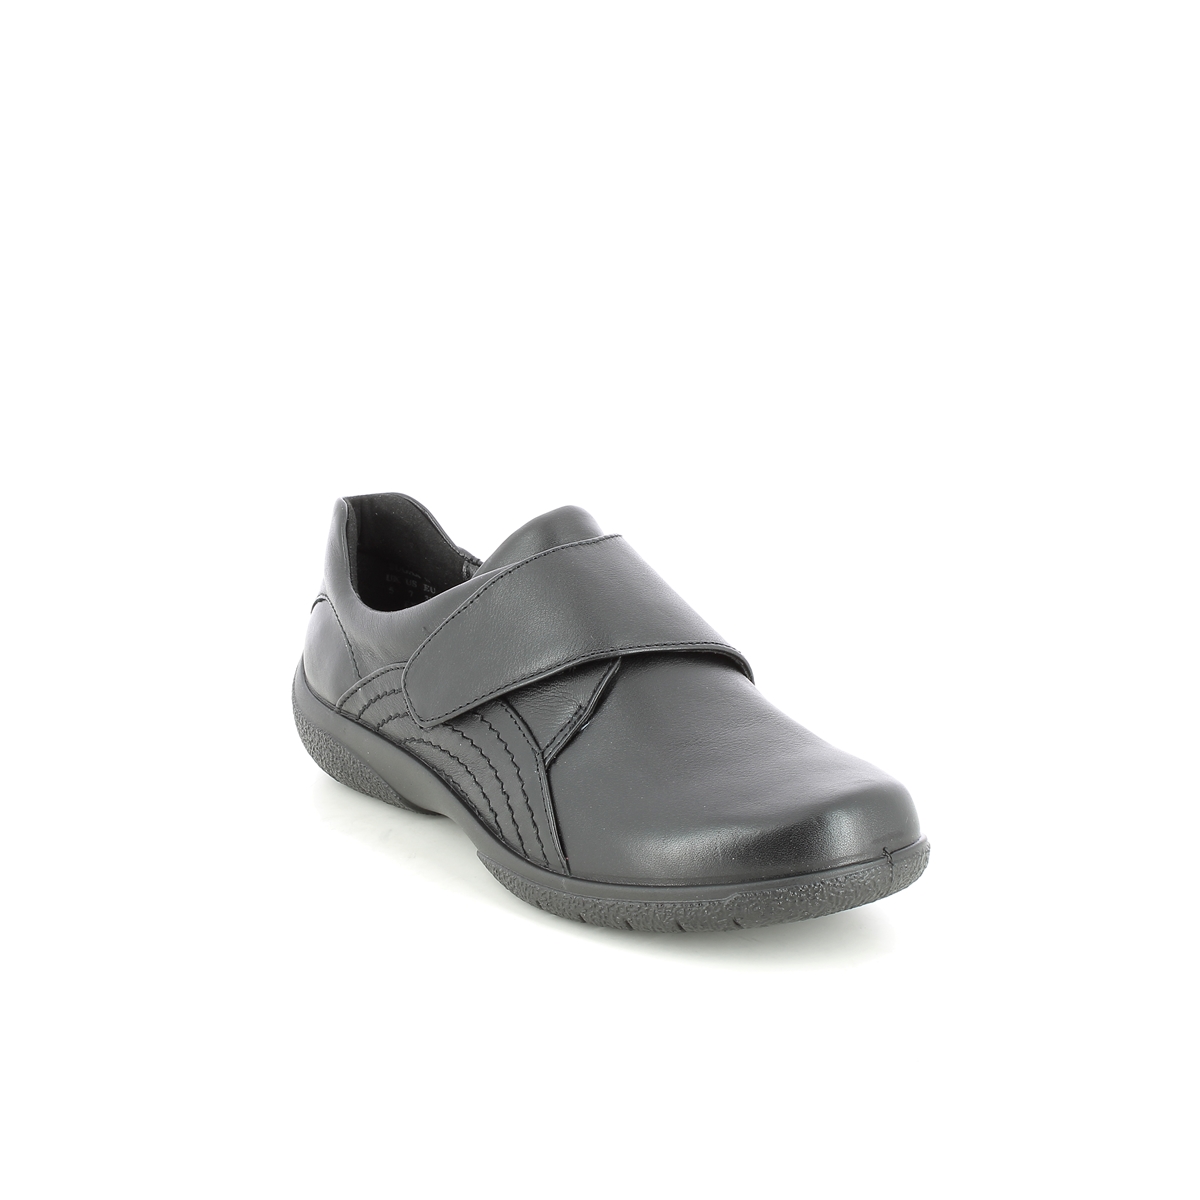 Hotter Sugar 2 Wide Black leather Womens Comfort Slip On Shoes 12011-30 in a Plain Leather in Size 5.5